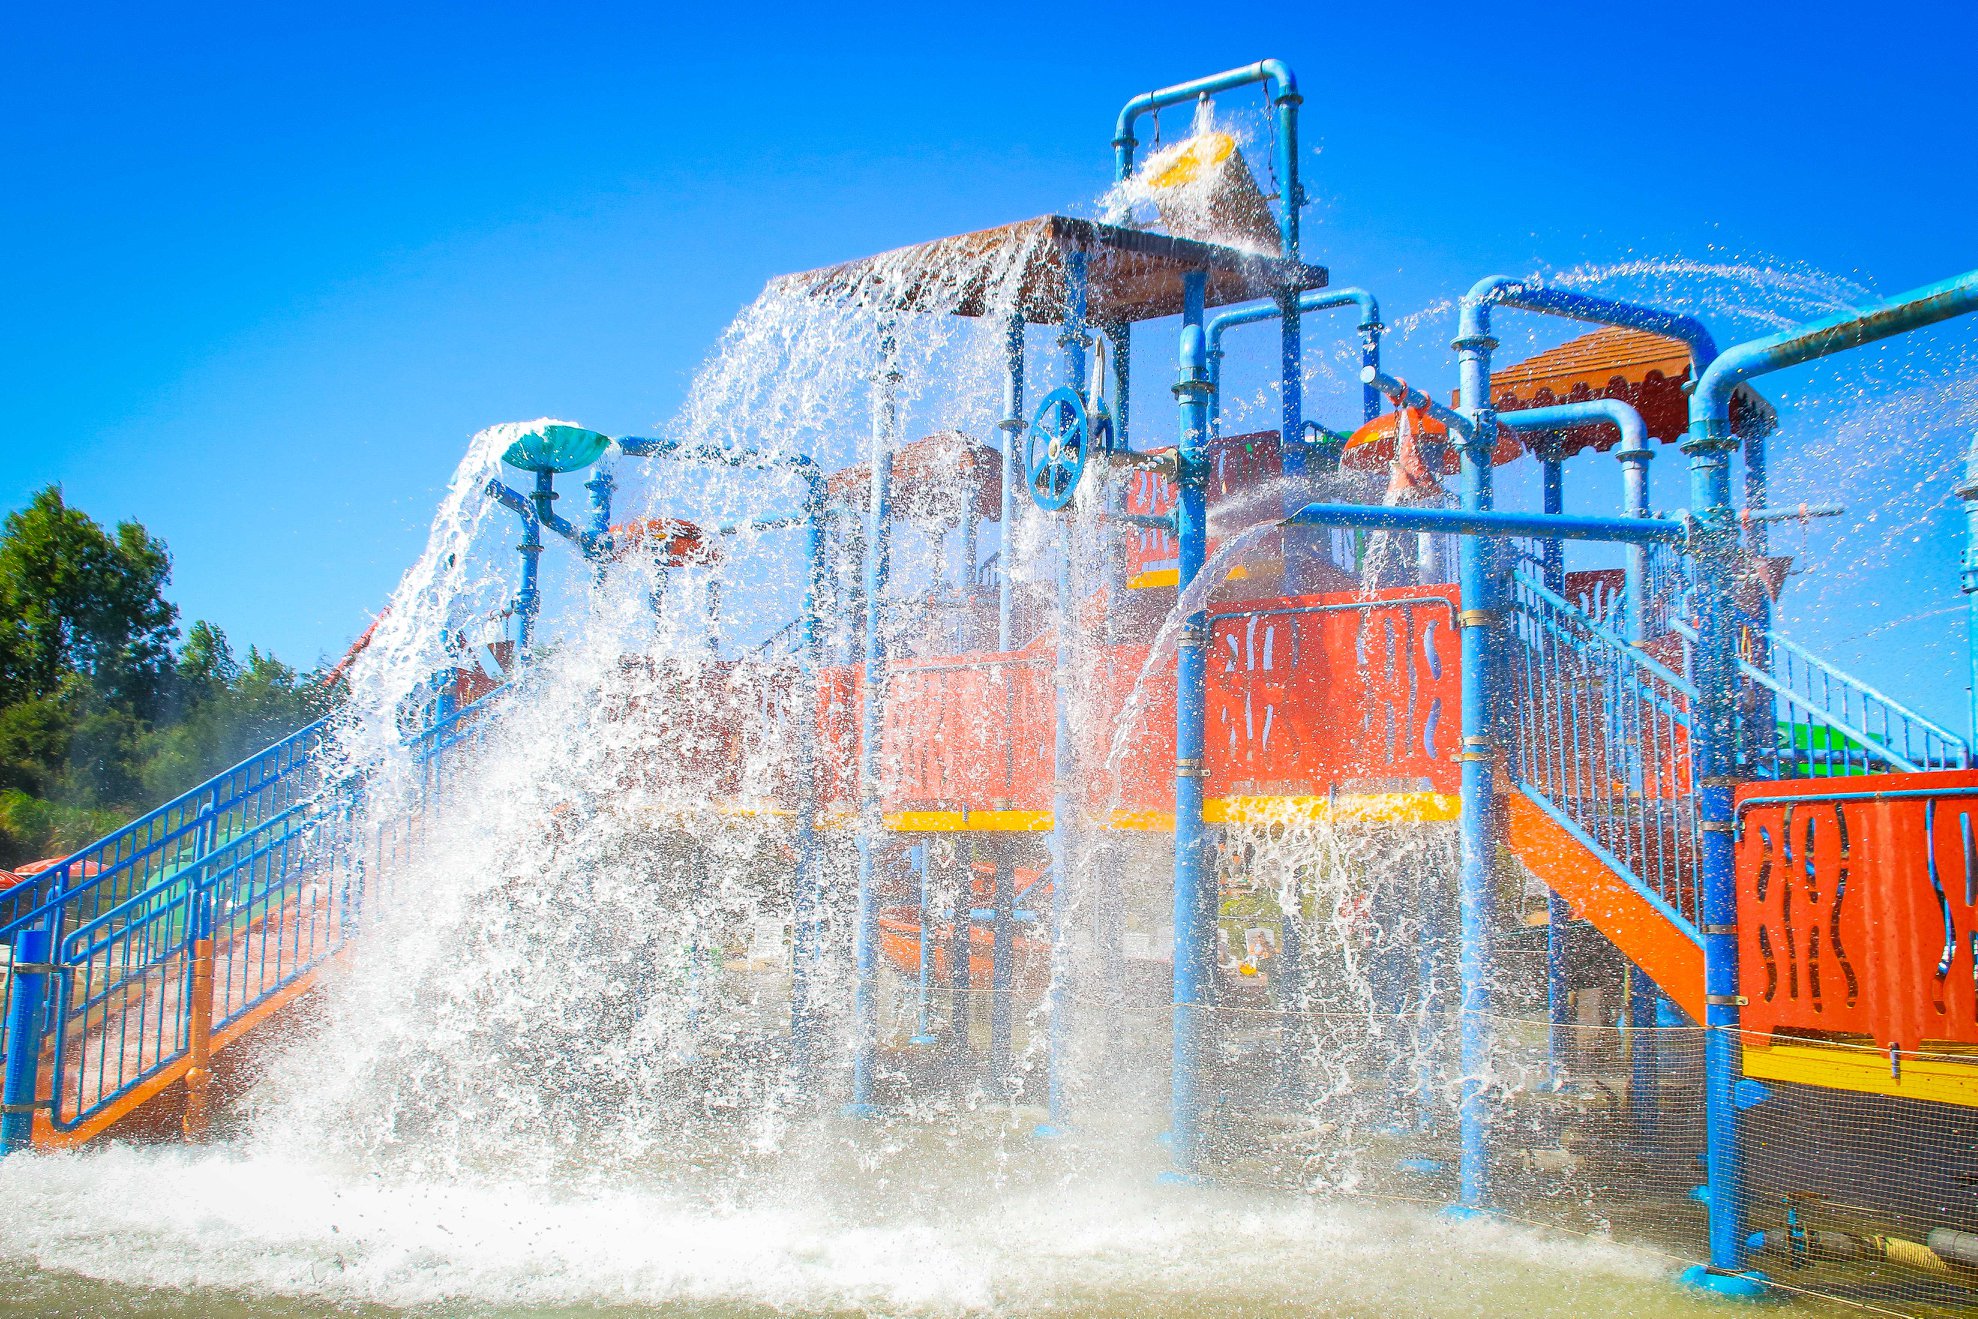 a-modesto-water-park-that-will-make-a-splash-with-your-group-nazing